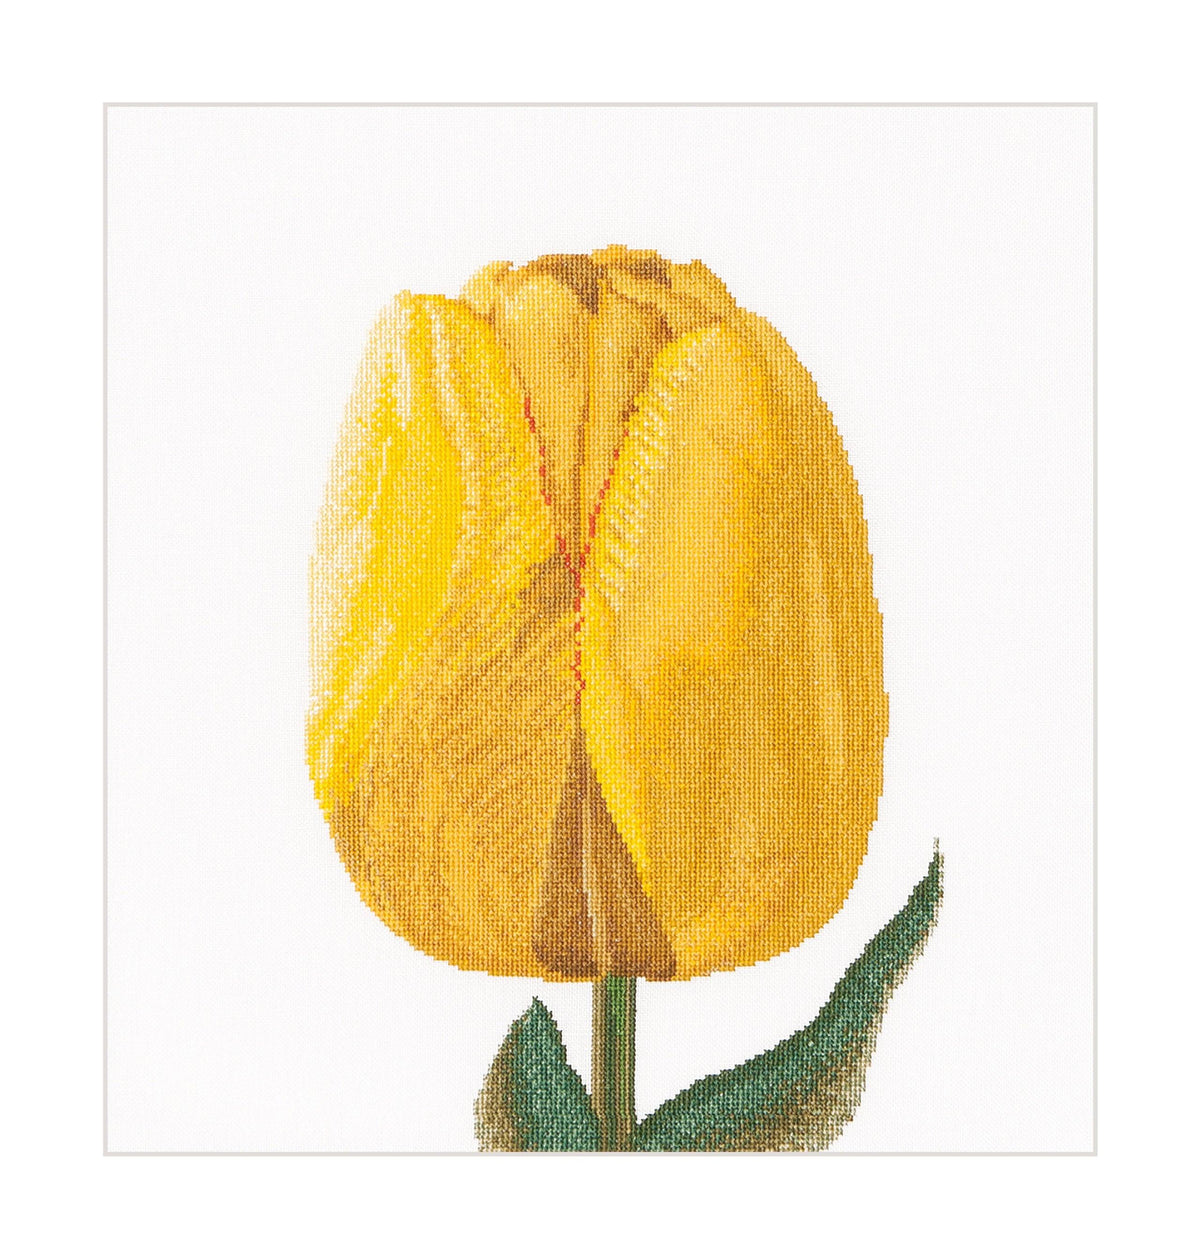 Thea Gouverneur - Counted Cross Stitch Kit - Yellow Hybrid Tulip - Linen - 32 count - 522 - Thea Gouverneur Since 1959